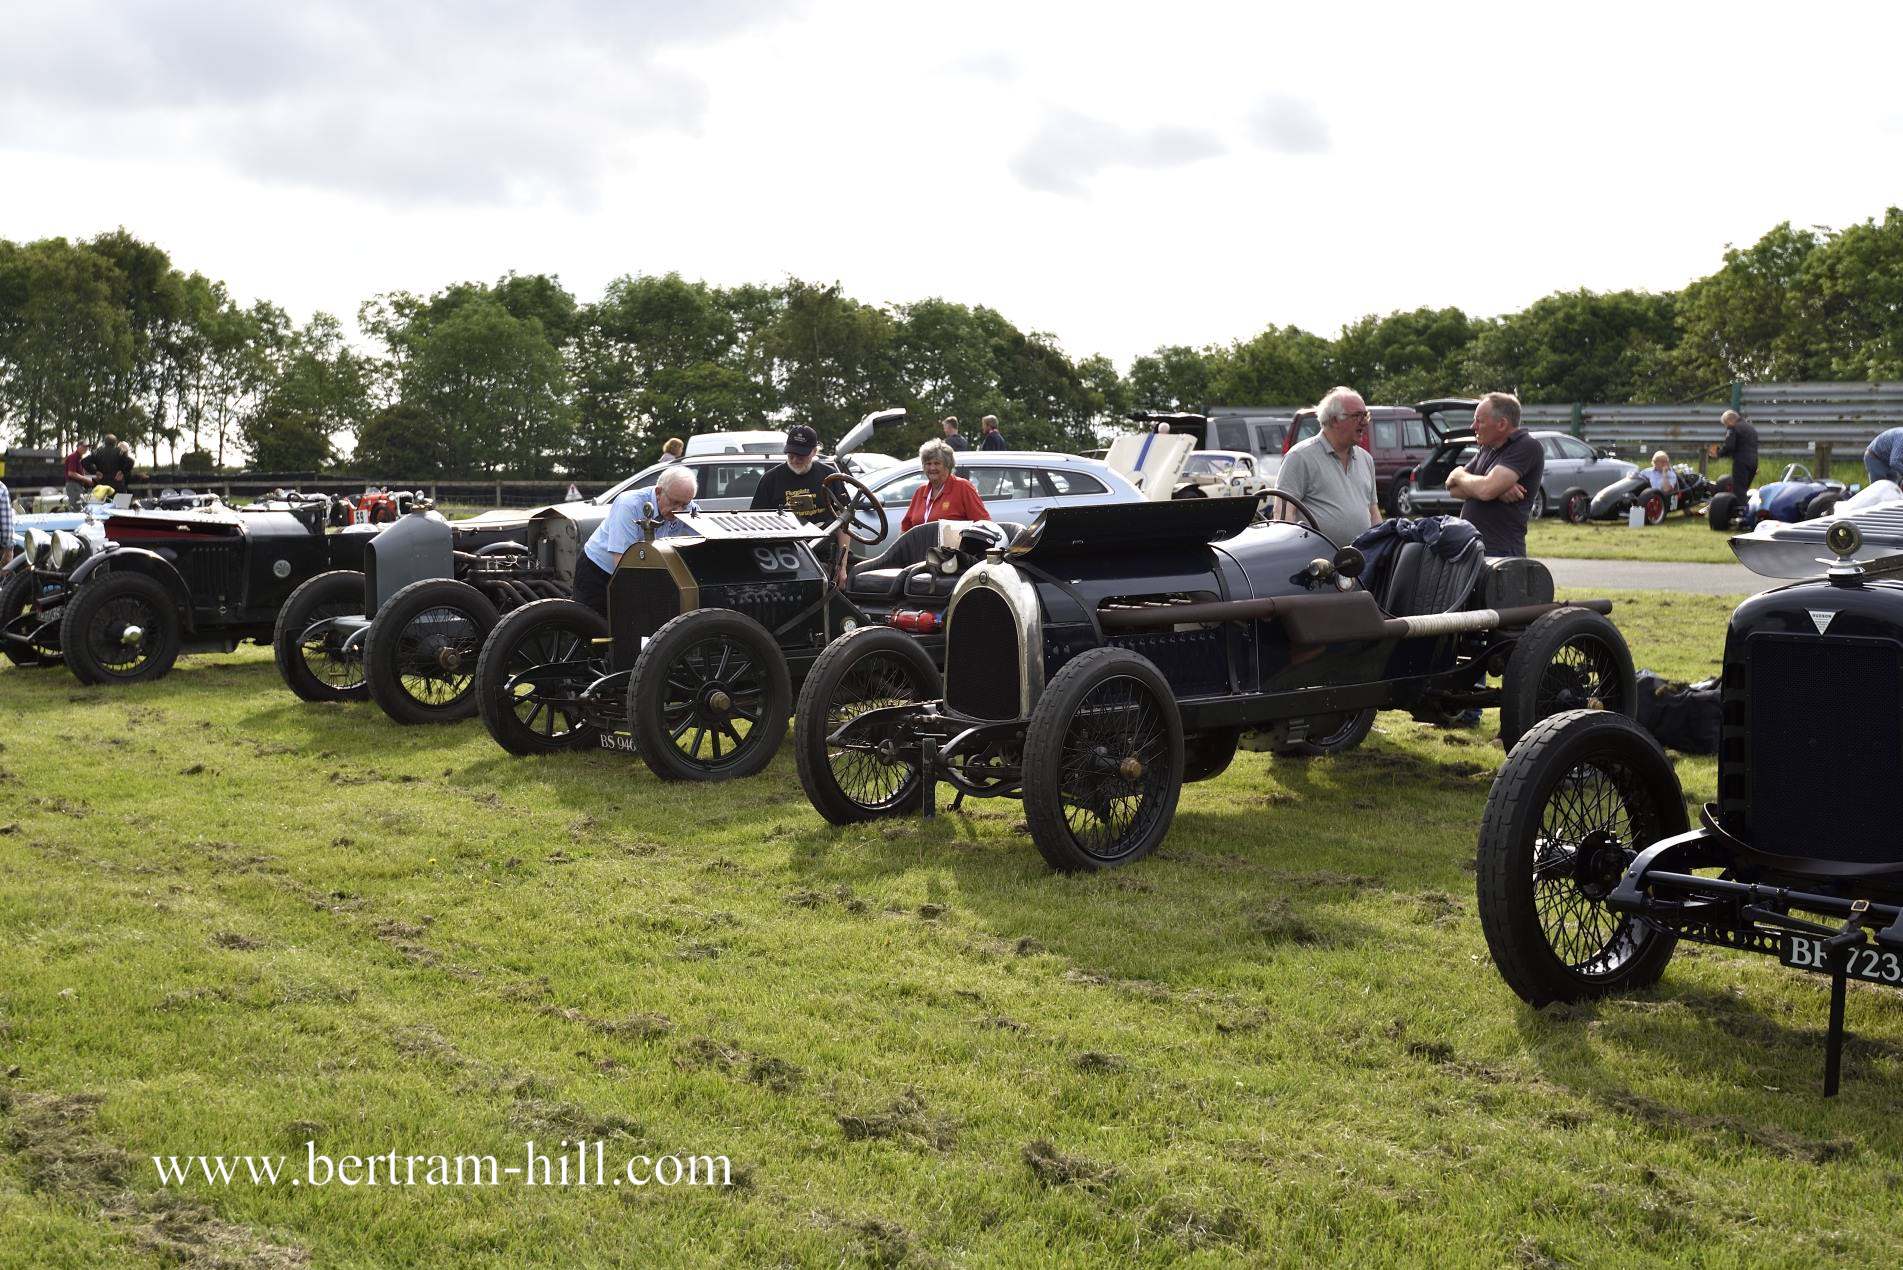 Showers at Harewood Hill - Round 3 of the VSCC Speed Championships cover